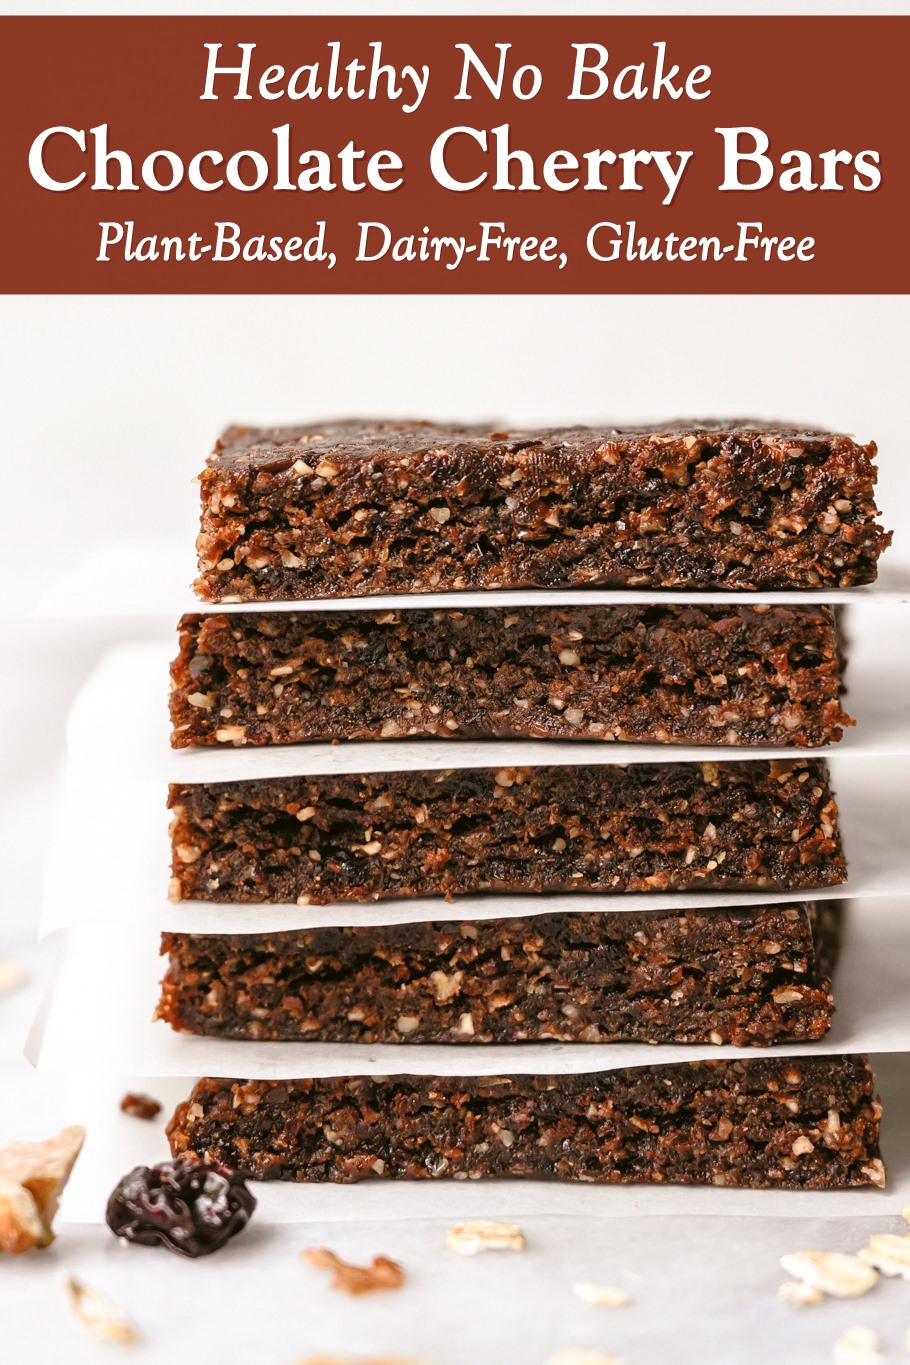 Chocolate Cherry Snack Bars Recipe - No Bake, Plant Based, Dairy Free, Gluten Free, and Healthy - uses simple, clean ingredients